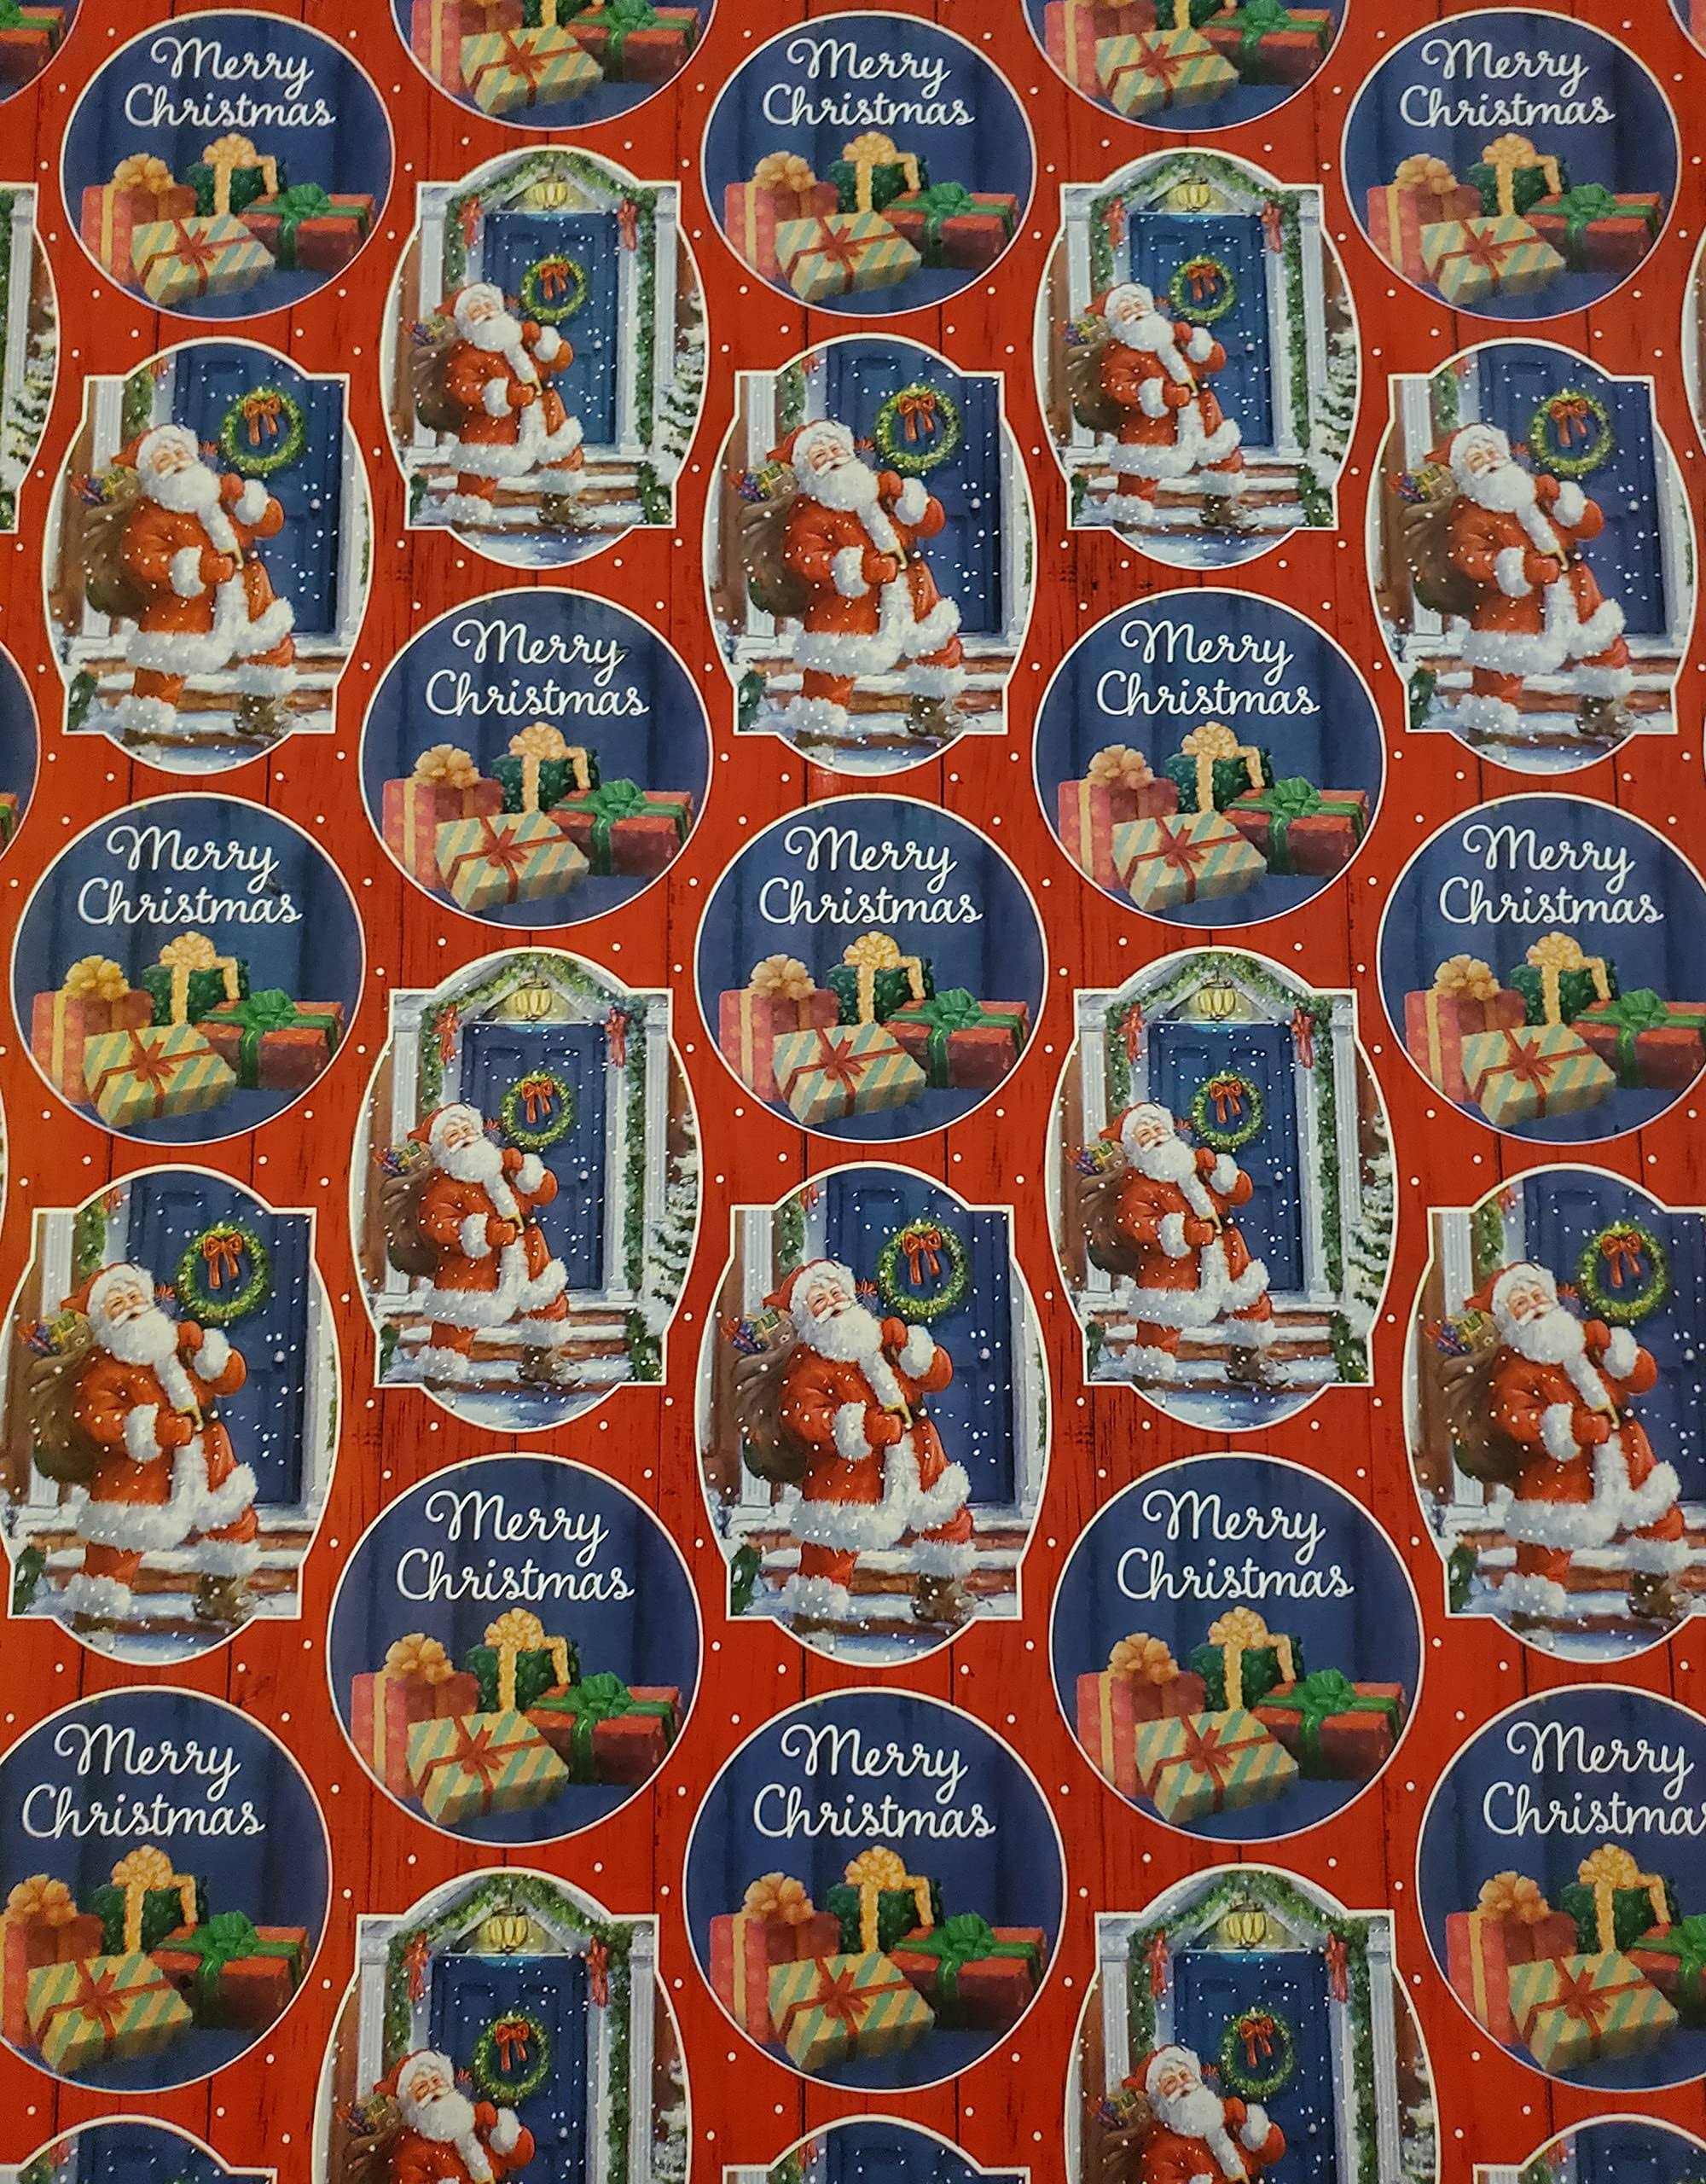 Merry Christmas Wrapping Paper - Set of 2 Rolls (Santa)